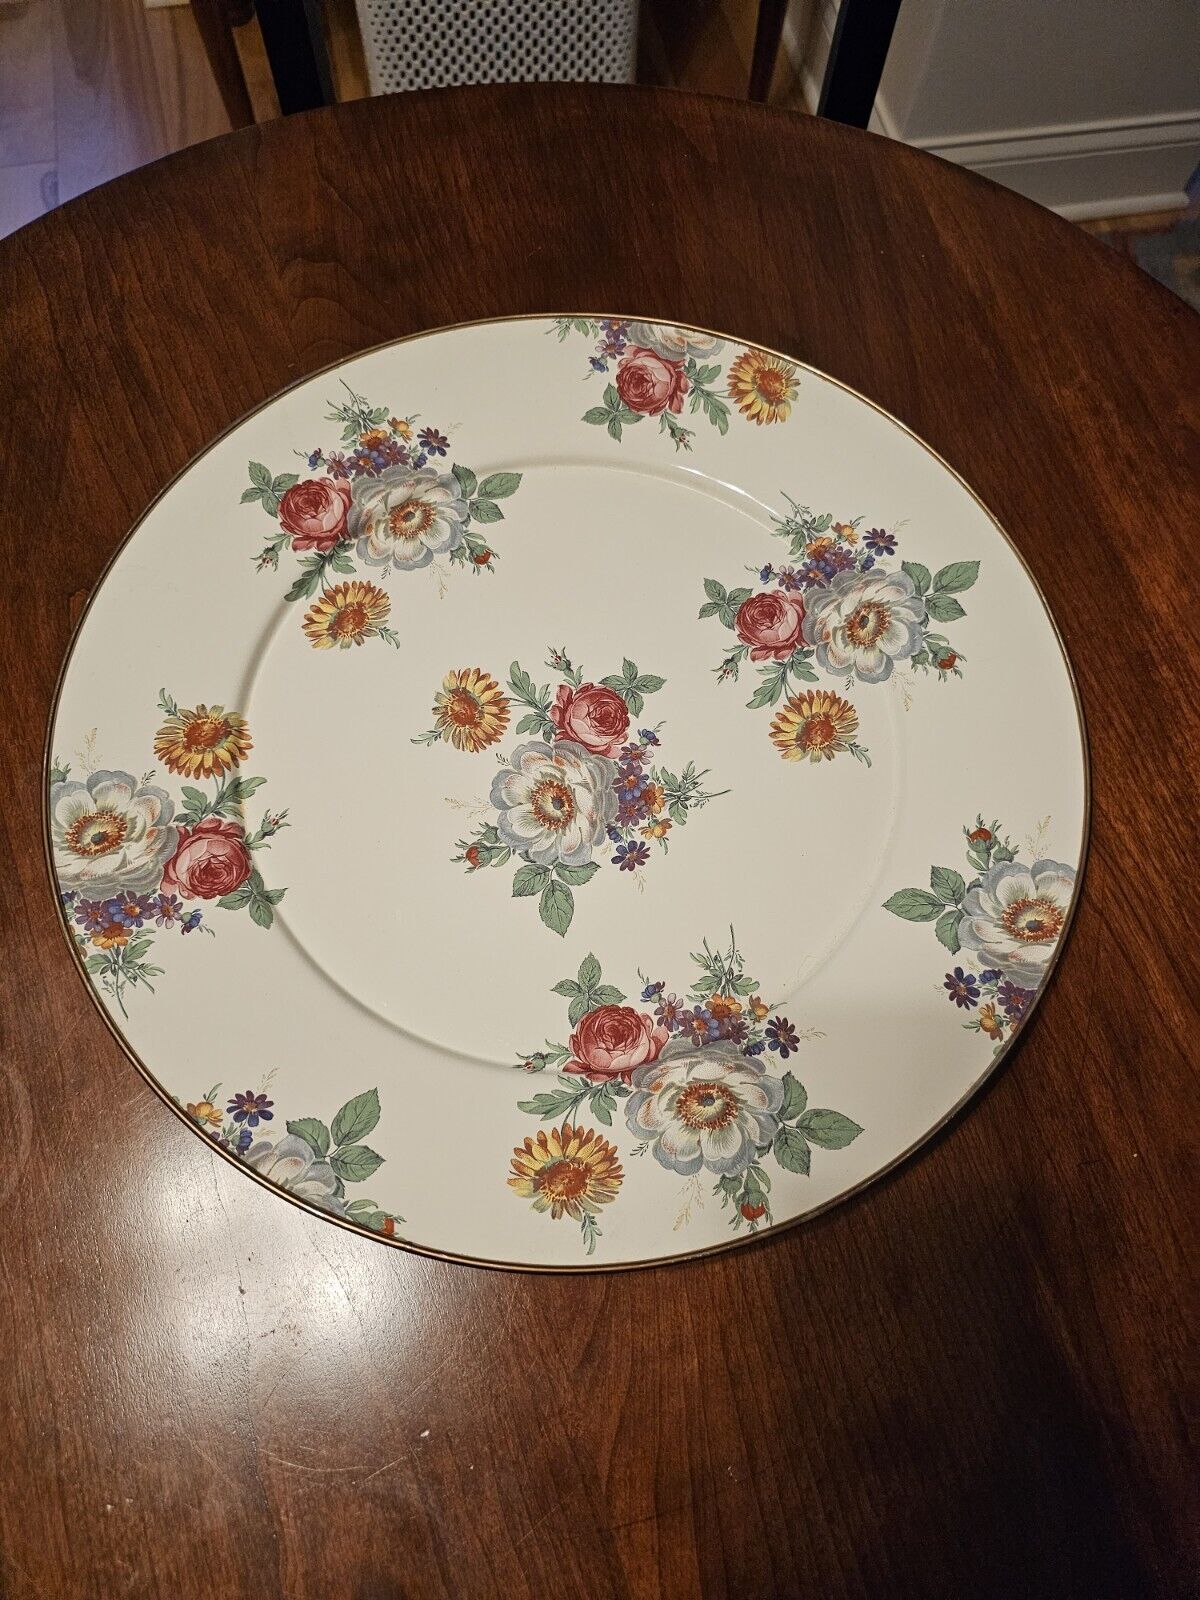 Camp MacKenzie-Childs 1995 Off White Enamel  Round Floral Roses Tray Platter 16\